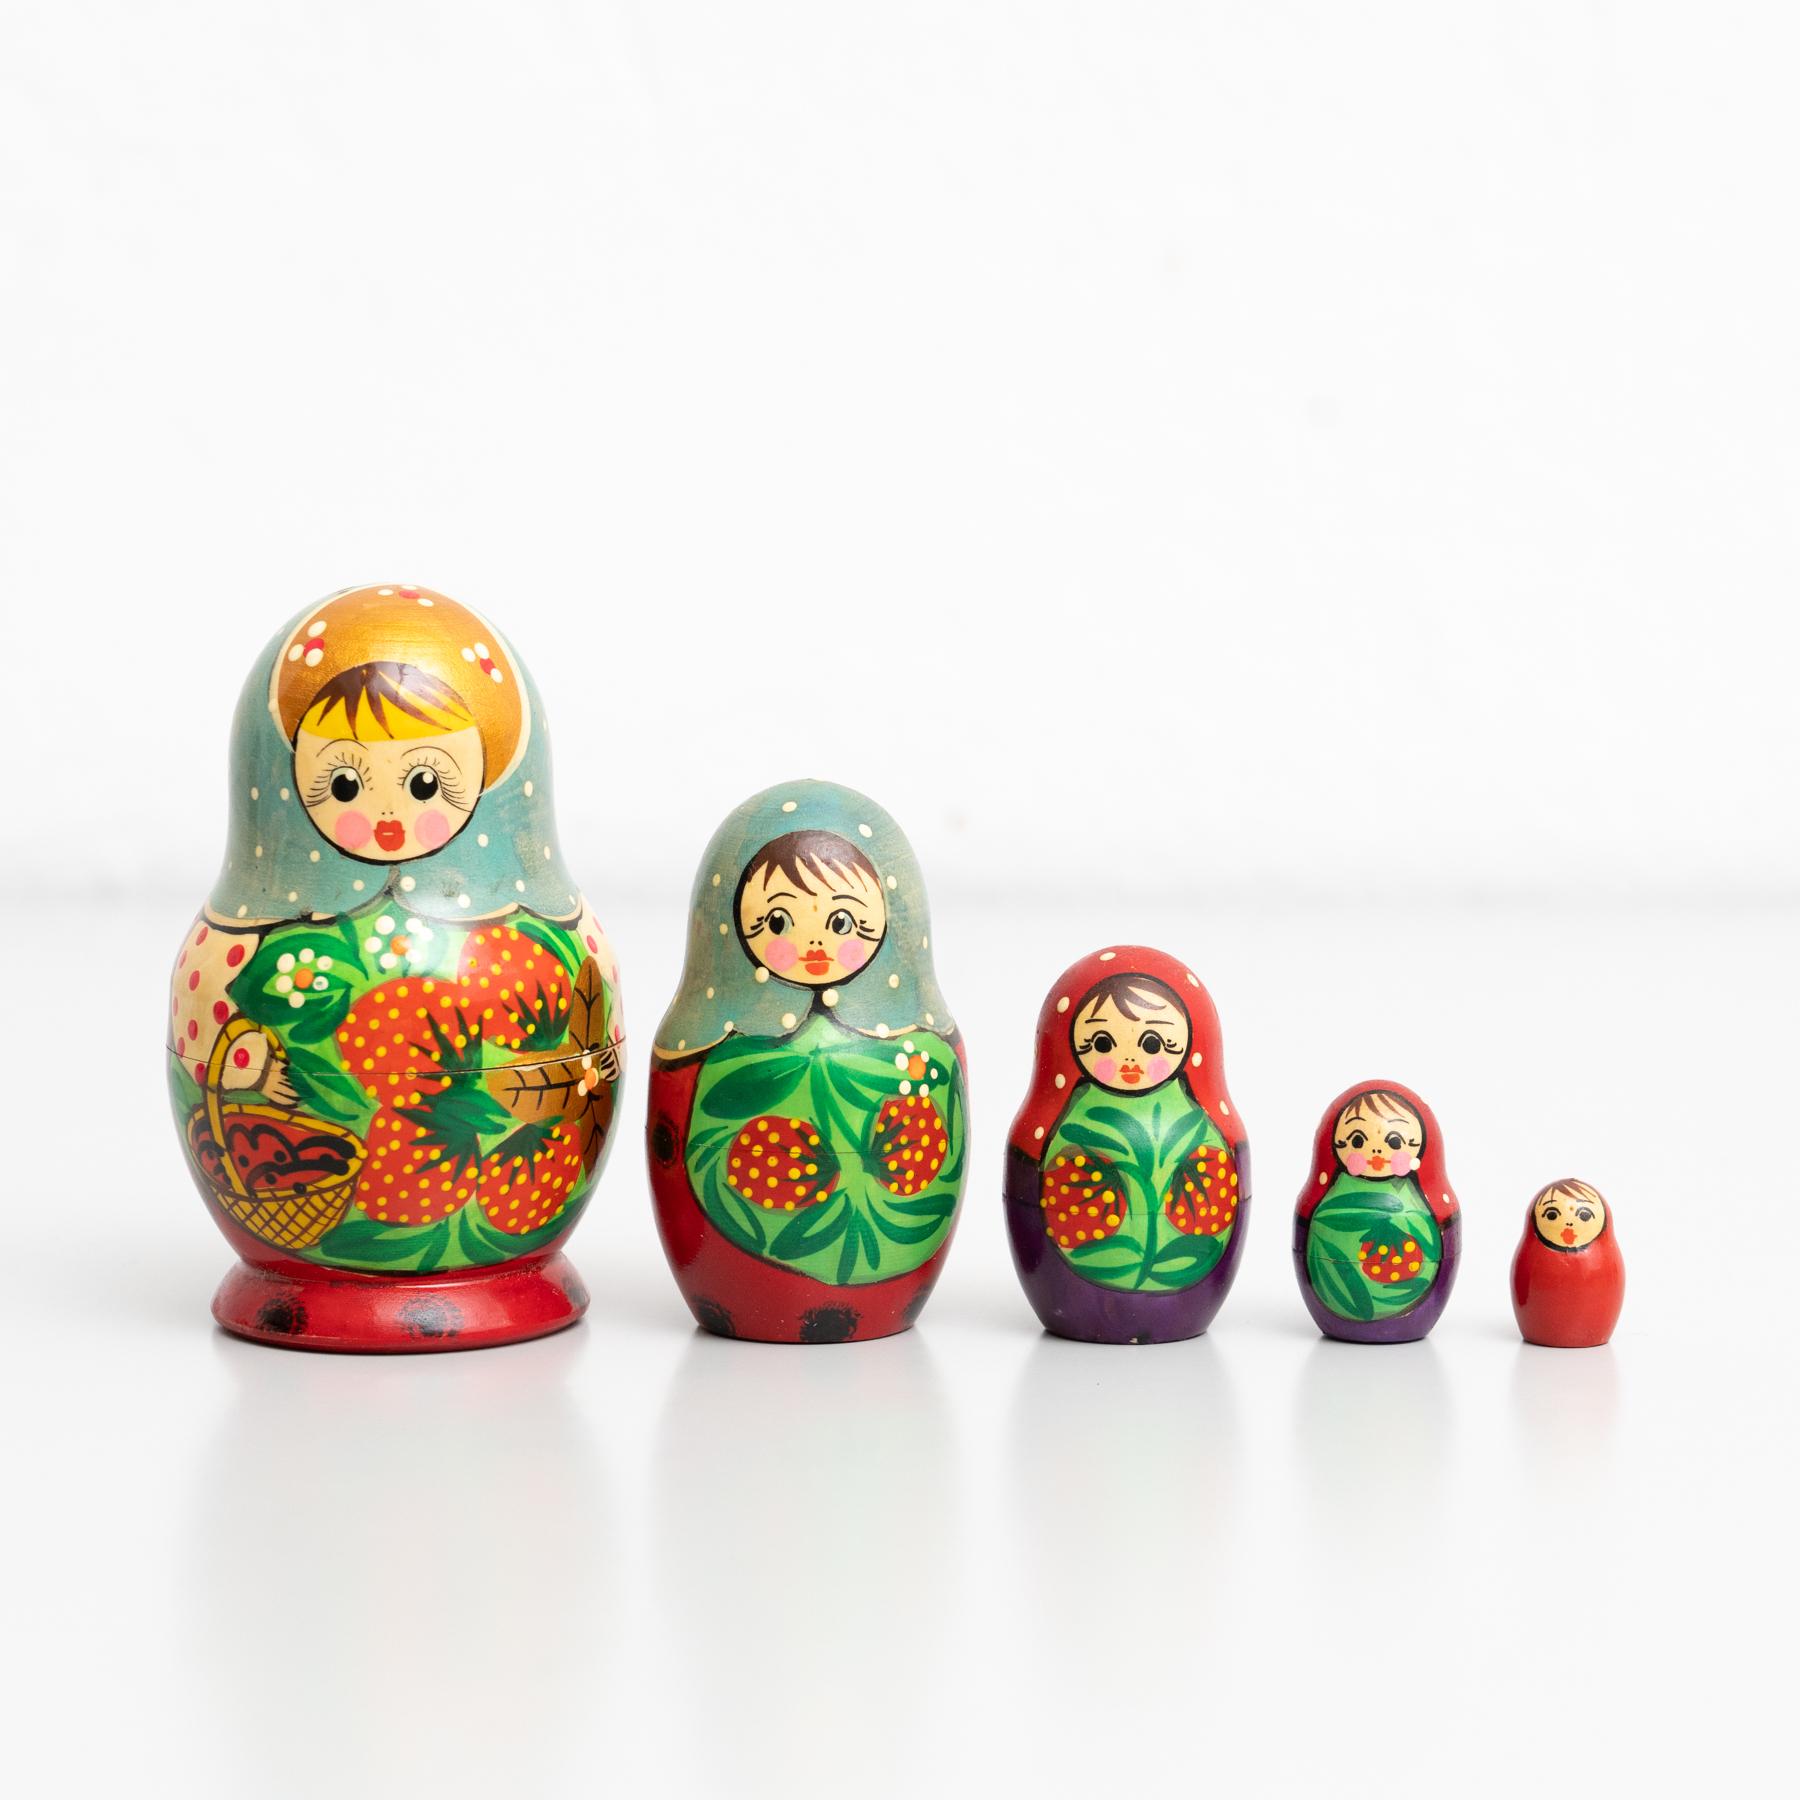 Antique Traditional Hand-Painted Wooden Russian Doll, circa 1960 For Sale 10